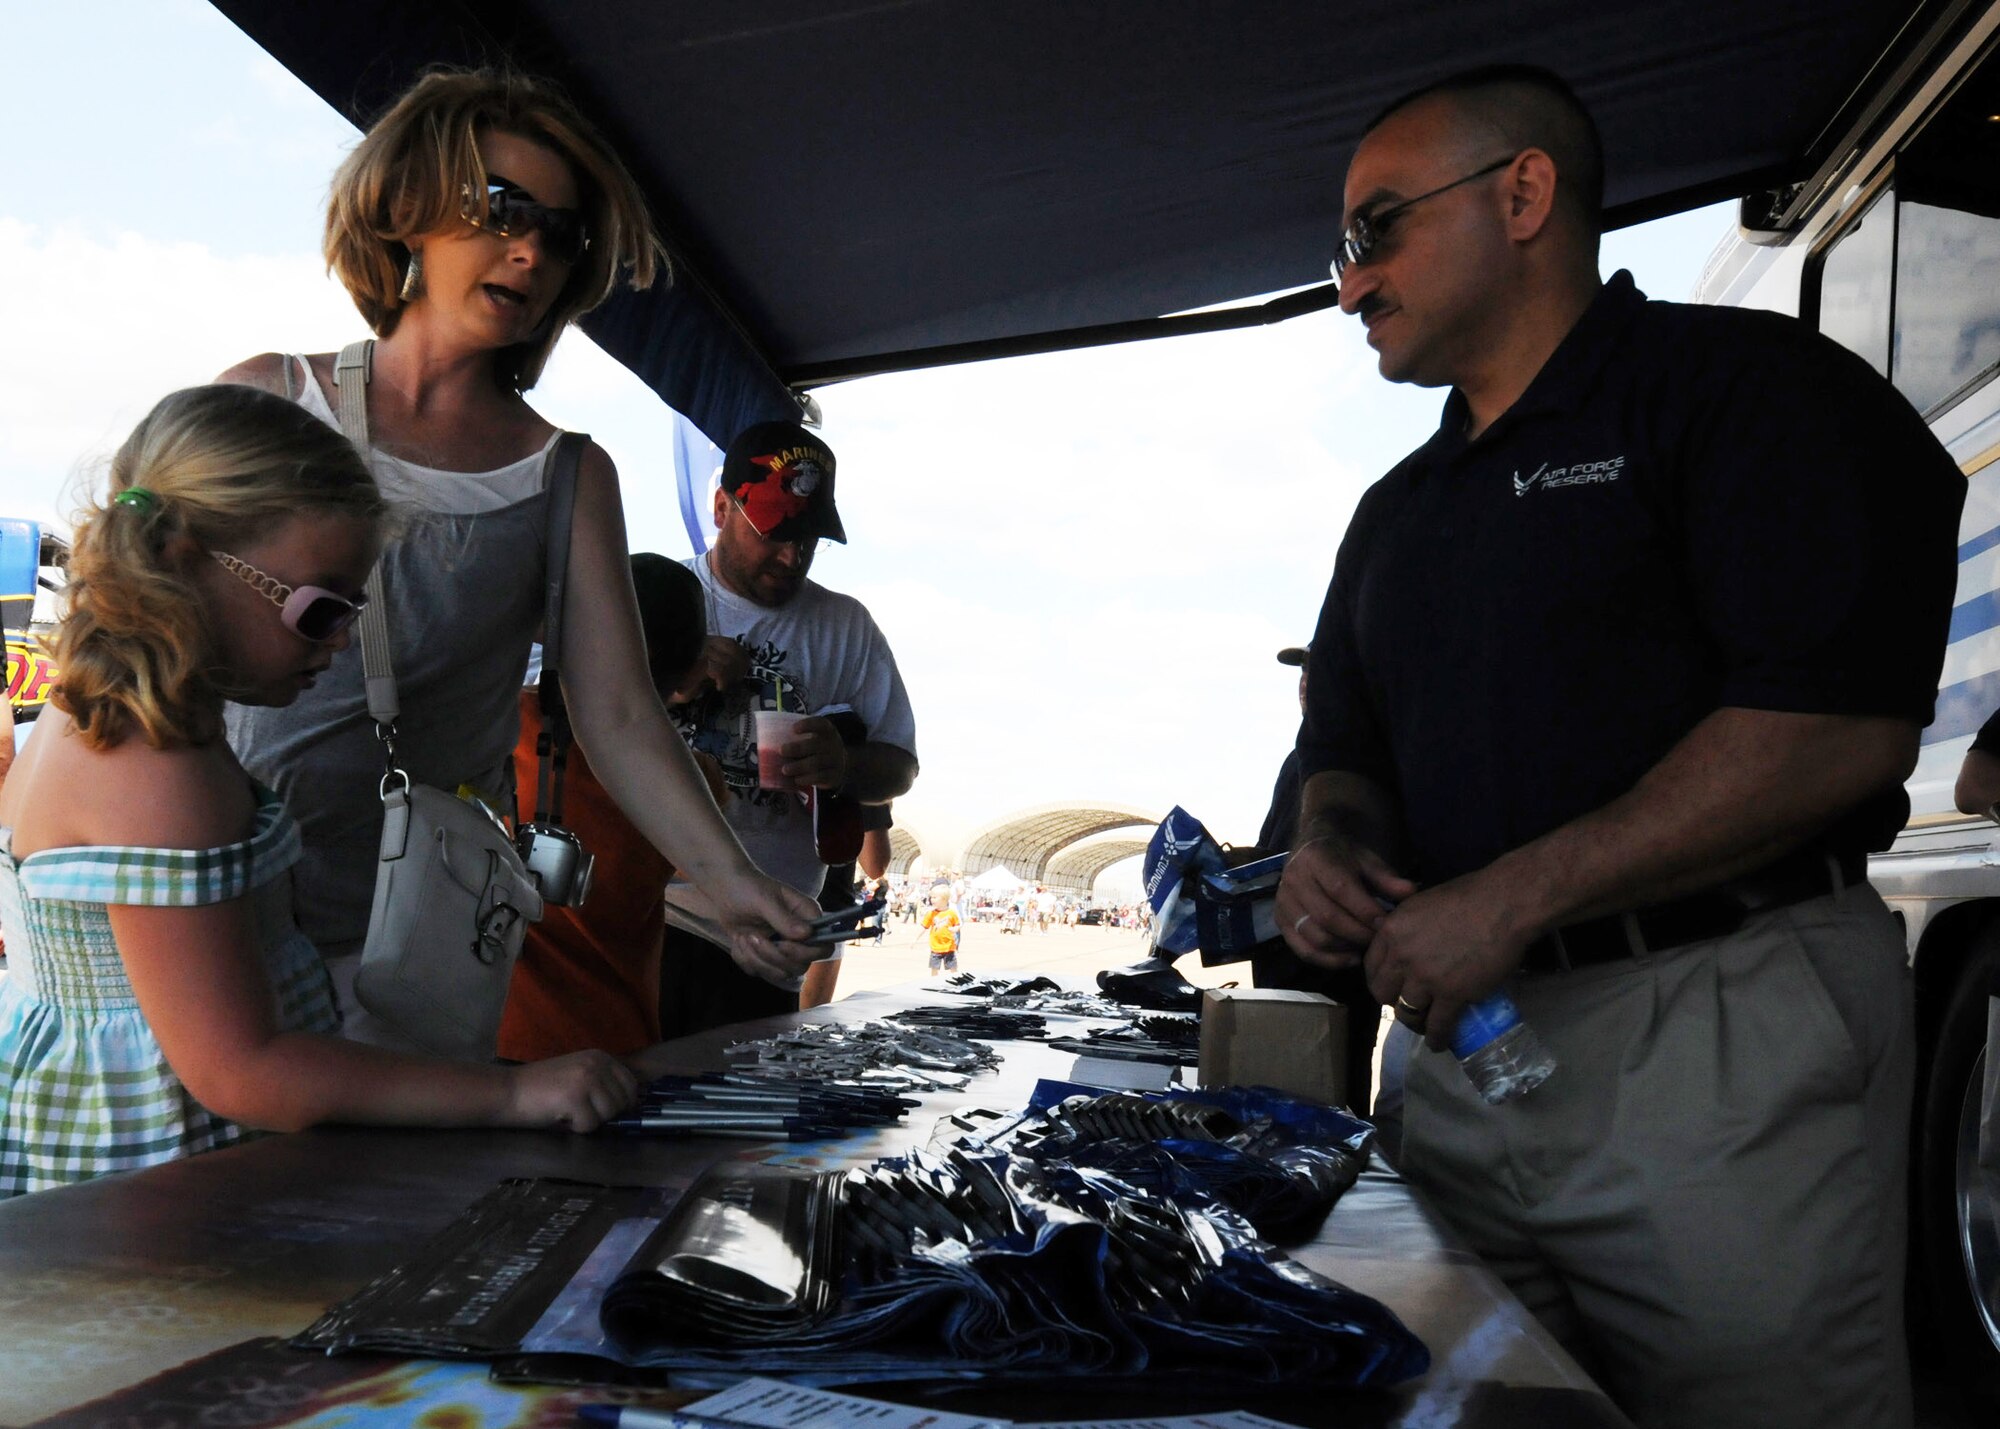 Possible recruits stop by and pick up "goodies" at the Air Force Reserve tent April 11 at the Eglin Air Force Base 75th Anniversary Airshow.  More than 125,000 were in attendance during the air show April 10-11, enjoying a variety of aerial performances and static displays. This was Eglin’s first open house since 2007 and was timed to coincide with the 75th anniversary of the installation. The Thunderbirds, F-22A Raptor demo and “Tora, Tora, Tora” were some of the highlights of the event.  (U.S. Air Force photo/Tech. Sgt. Samuel King Jr.)